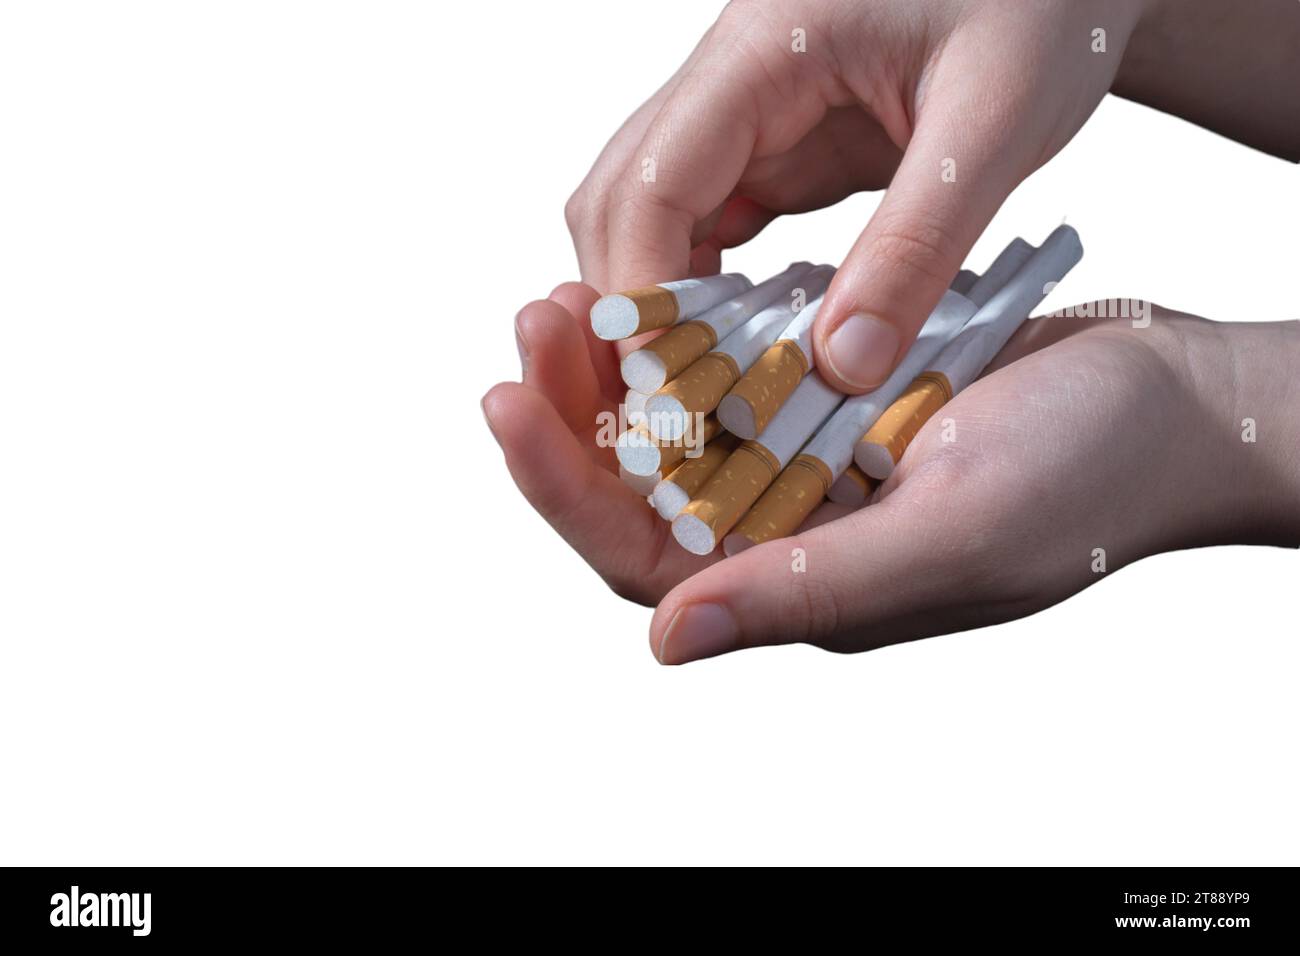 Tobacco smoke addiction, unhealthy lifestyle. Stop smoking, quit smoking or no smoking cigarettes. Hand holdingcigarettes in hands. Quit bad habit Stock Photo